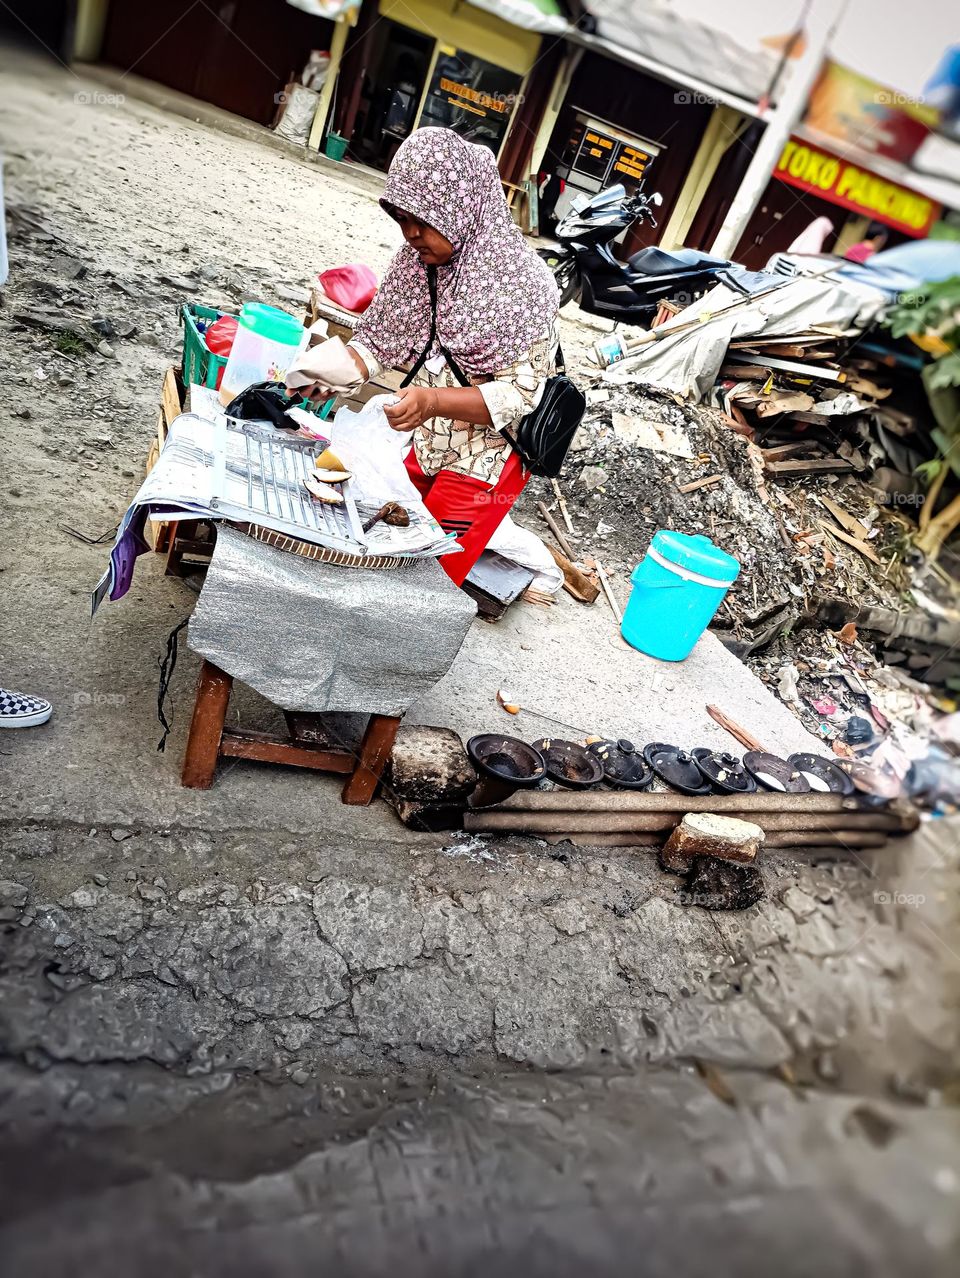 A Mother is Selling Traditional Meal, Near The Street